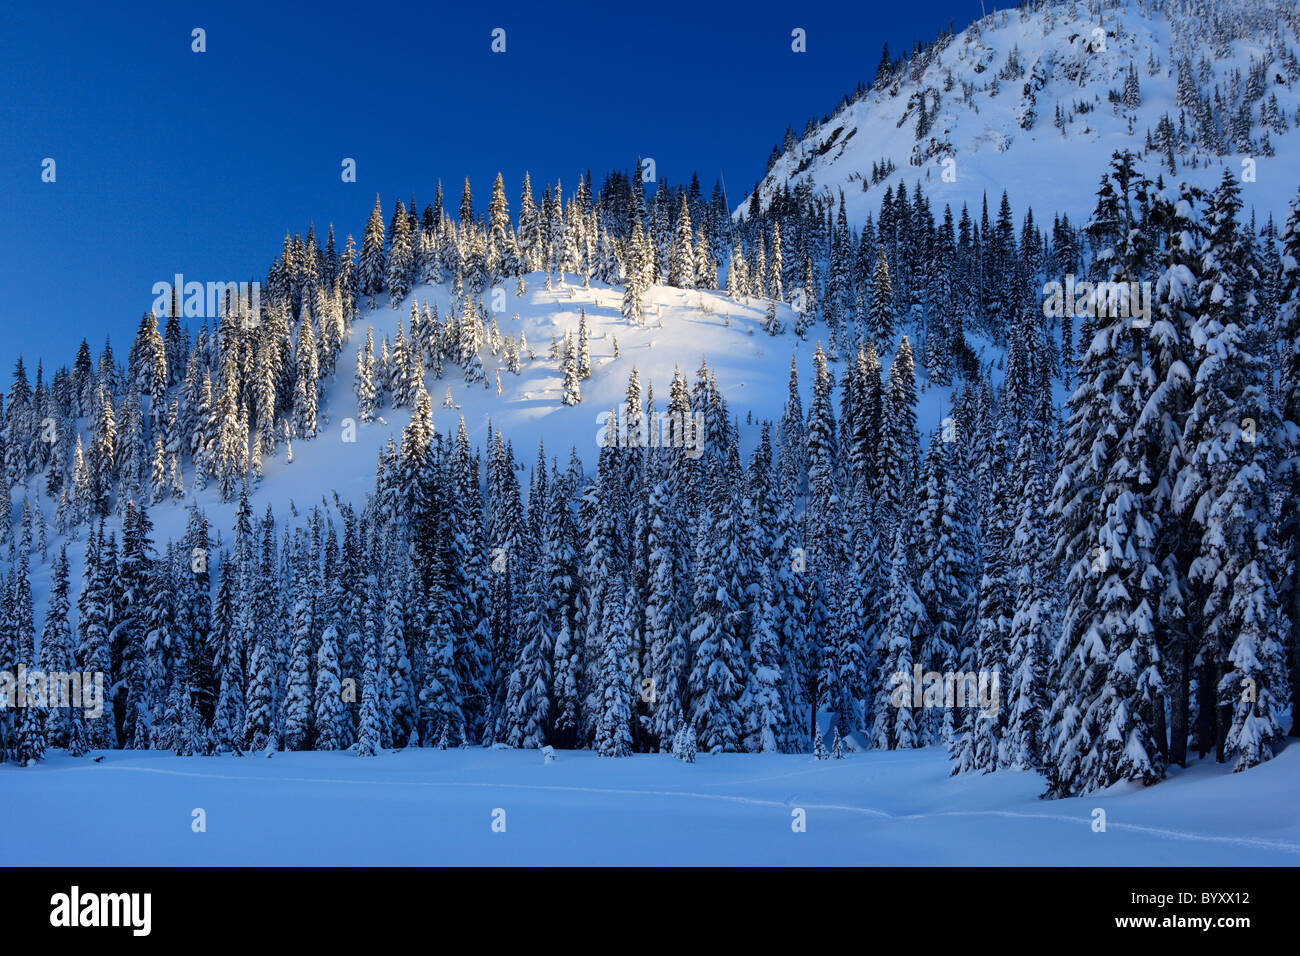 Mount Rainier National Park becomes a winter wonderland in winter, with snow covered trees and trails for snowshoeing or skiing Stock Photo